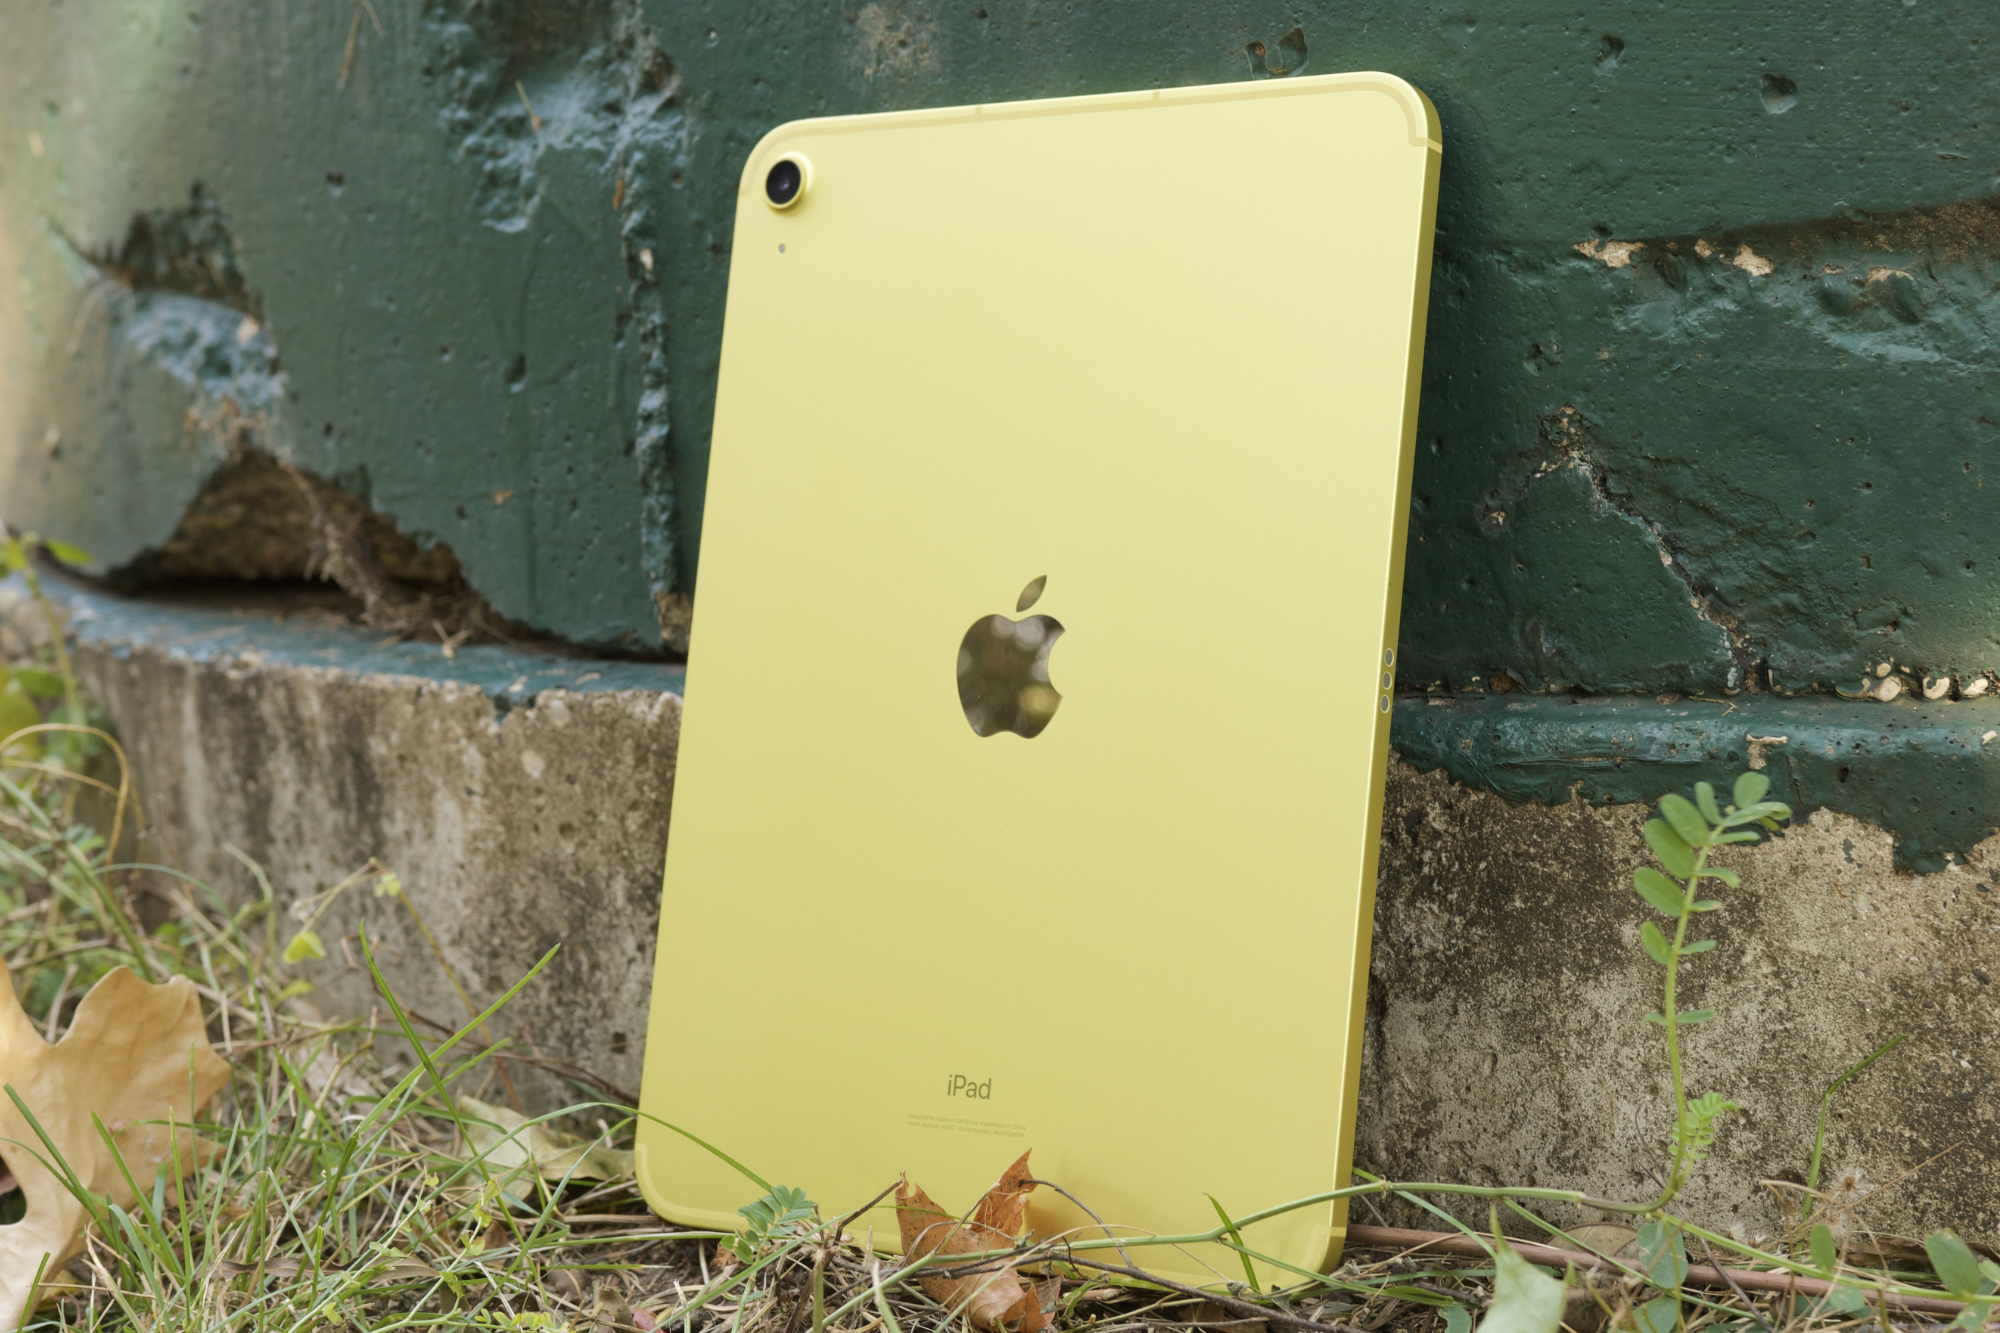 The iPad (2022) in its yellow color.